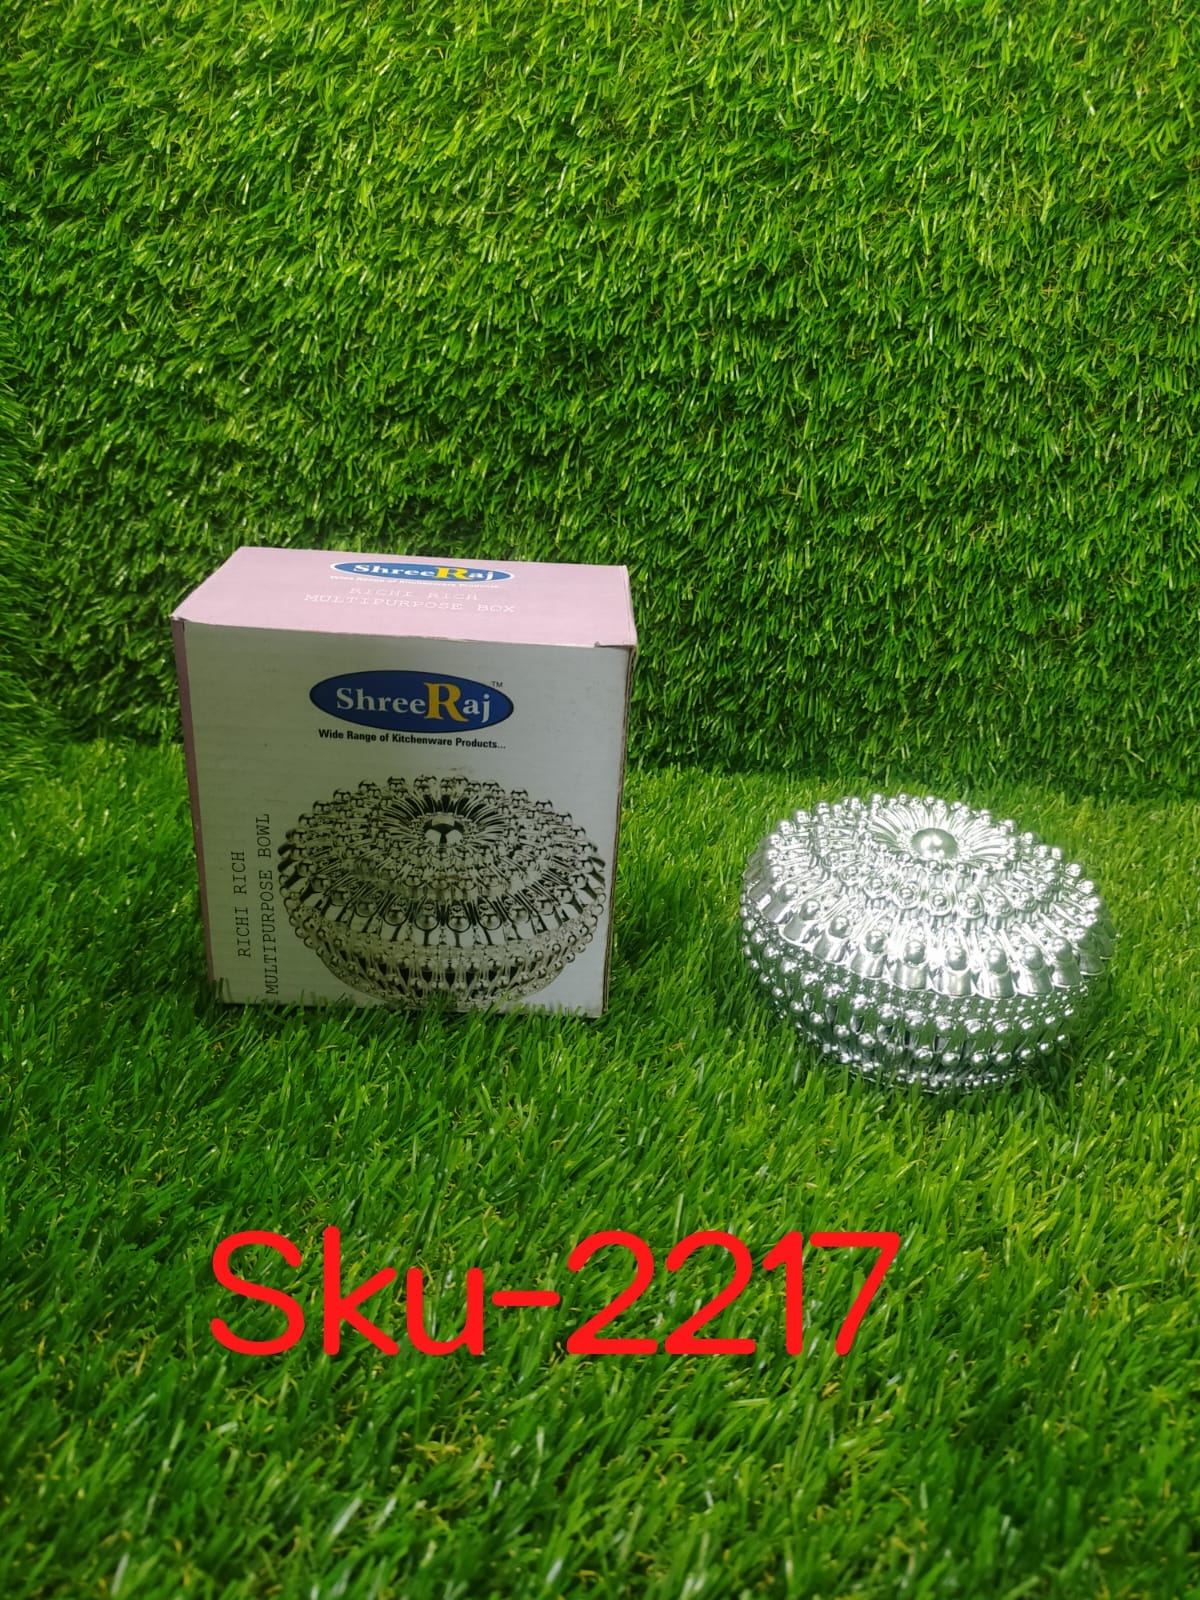 Decorative Bowl with Lid for Candy Box, Dry Fruit Box